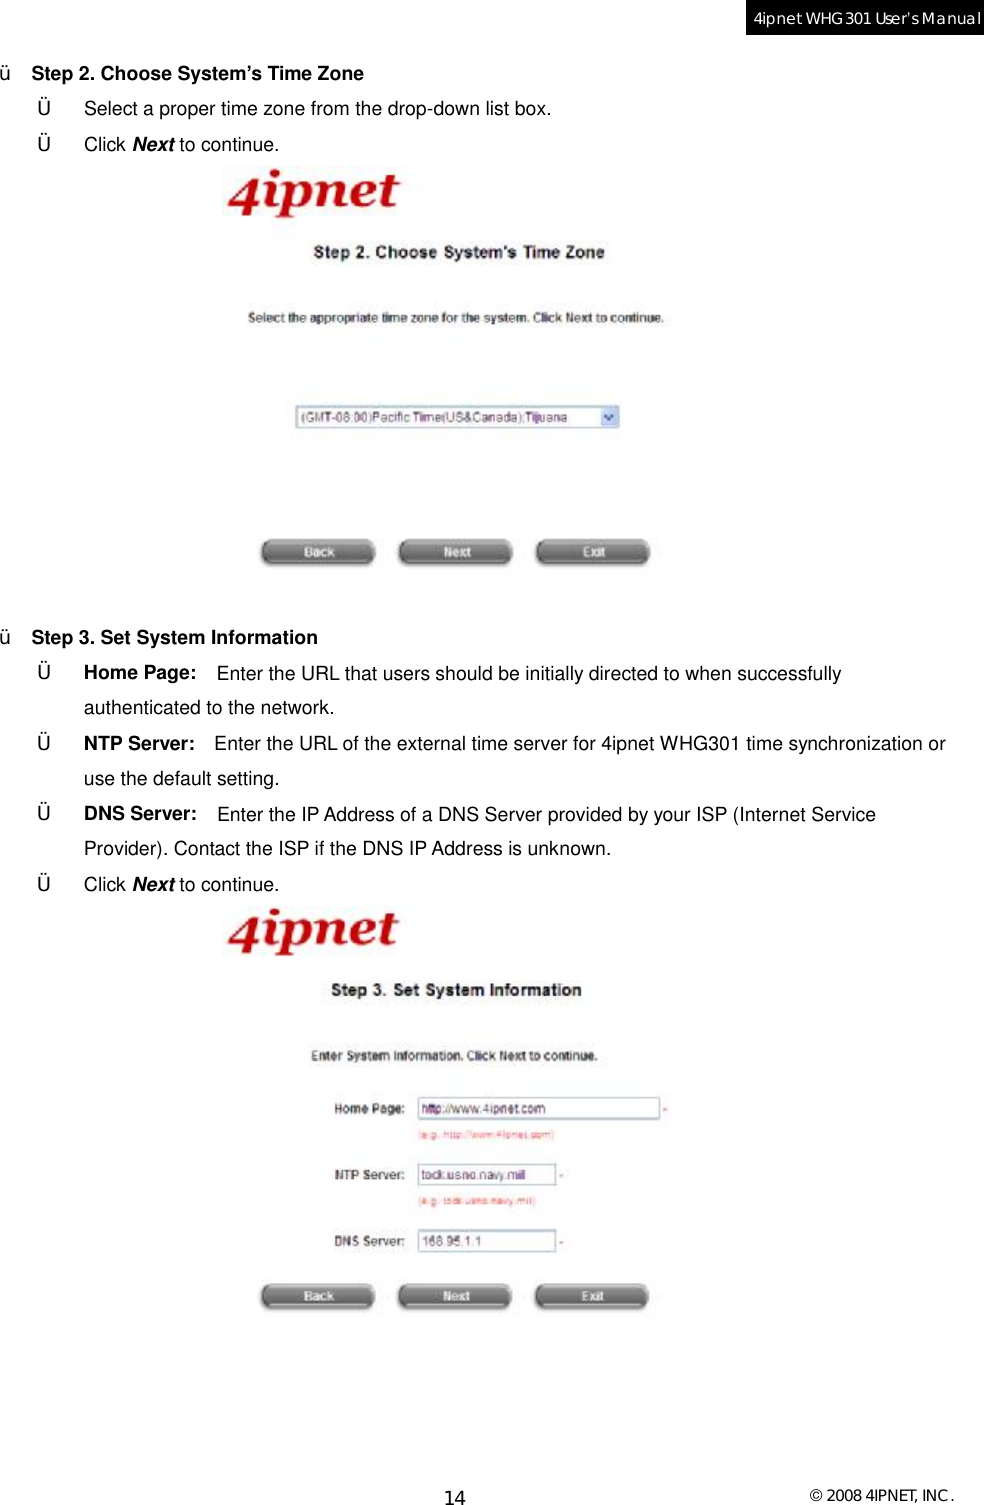  © 2008 4IPNET, INC. 14 4ipnet WHG301 User’s Manual  Ÿ  Step 2. Choose System’s Time Zone †  Select a proper time zone from the drop-down list box. †  Click Next to continue.   Ÿ  Step 3. Set System Information †  Home Page:  Enter the URL that users should be initially directed to when successfully authenticated to the network. †  NTP Server:  Enter the URL of the external time server for 4ipnet WHG301 time synchronization or use the default setting. †  DNS Server:  Enter the IP Address of a DNS Server provided by your ISP (Internet Service Provider). Contact the ISP if the DNS IP Address is unknown.  †  Click Next to continue.   